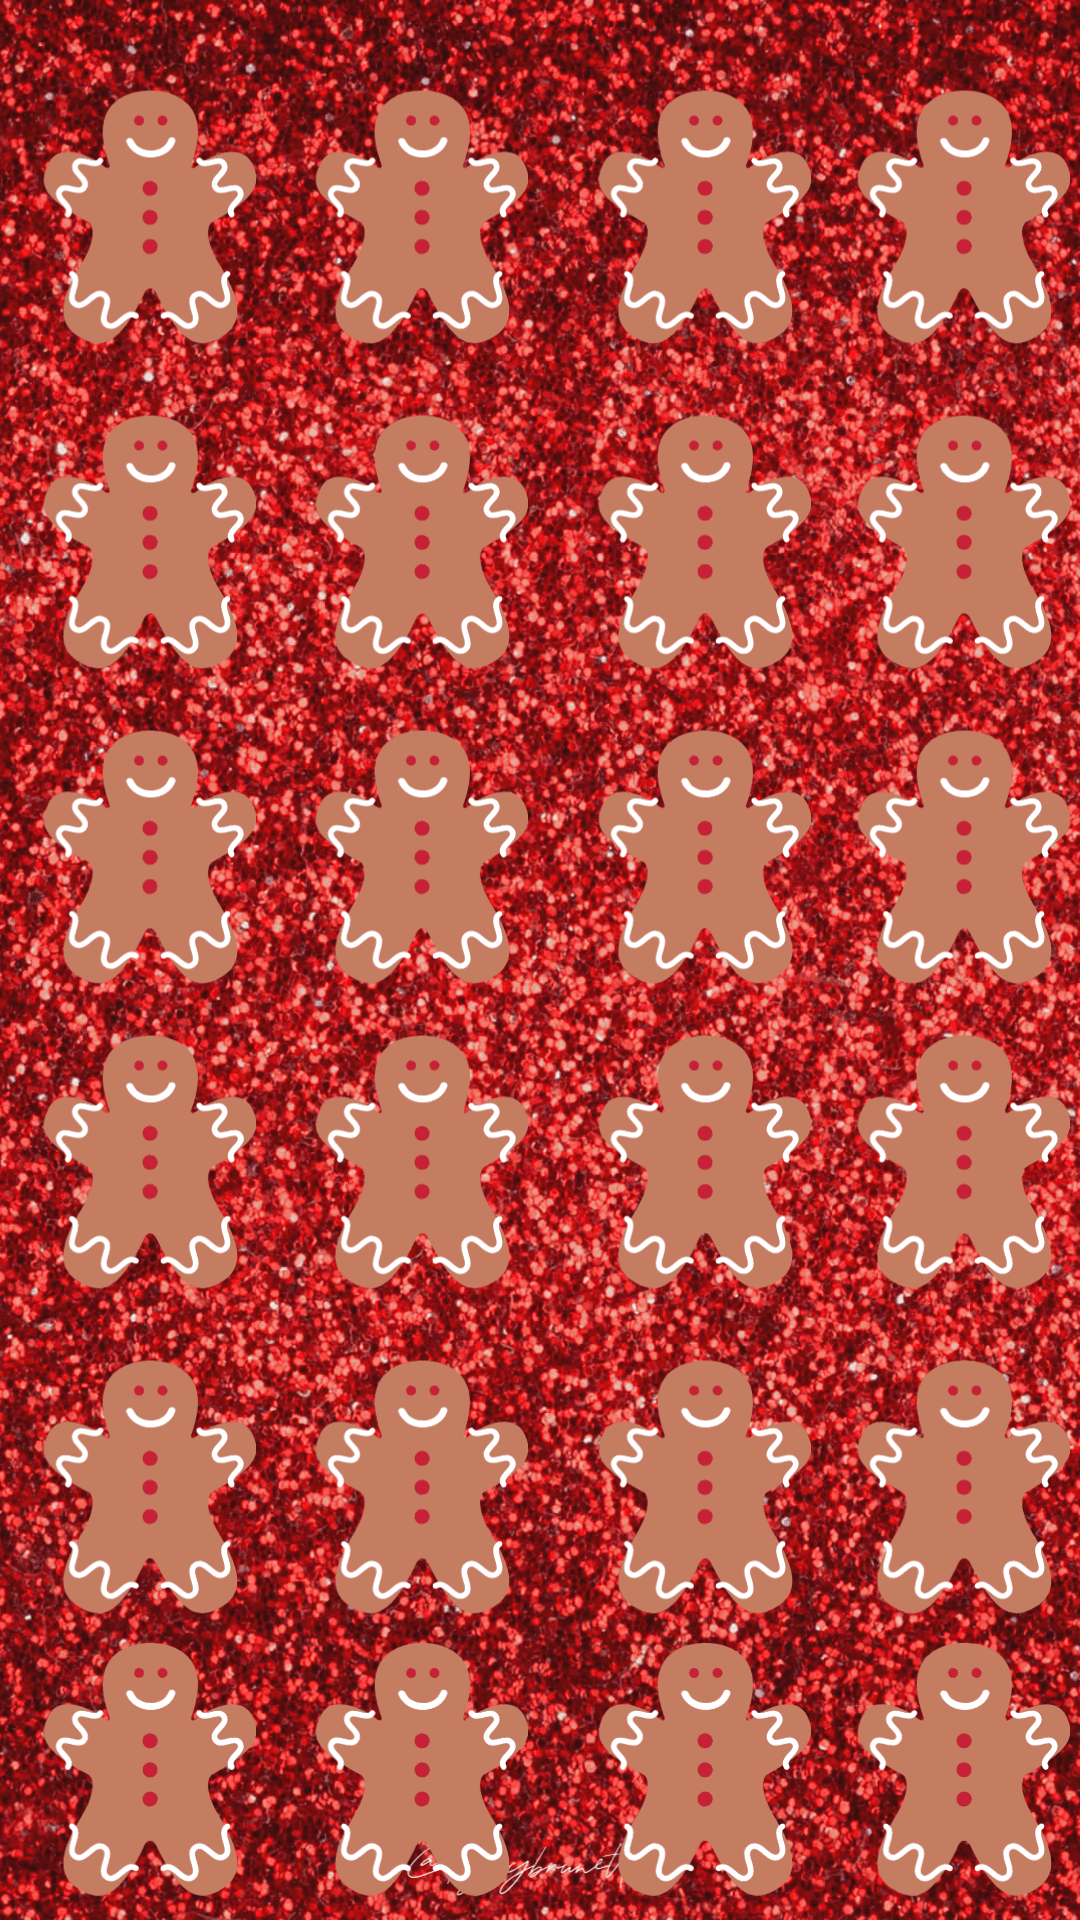 Get into the festive spirit with this fun Christmas Phone Background!